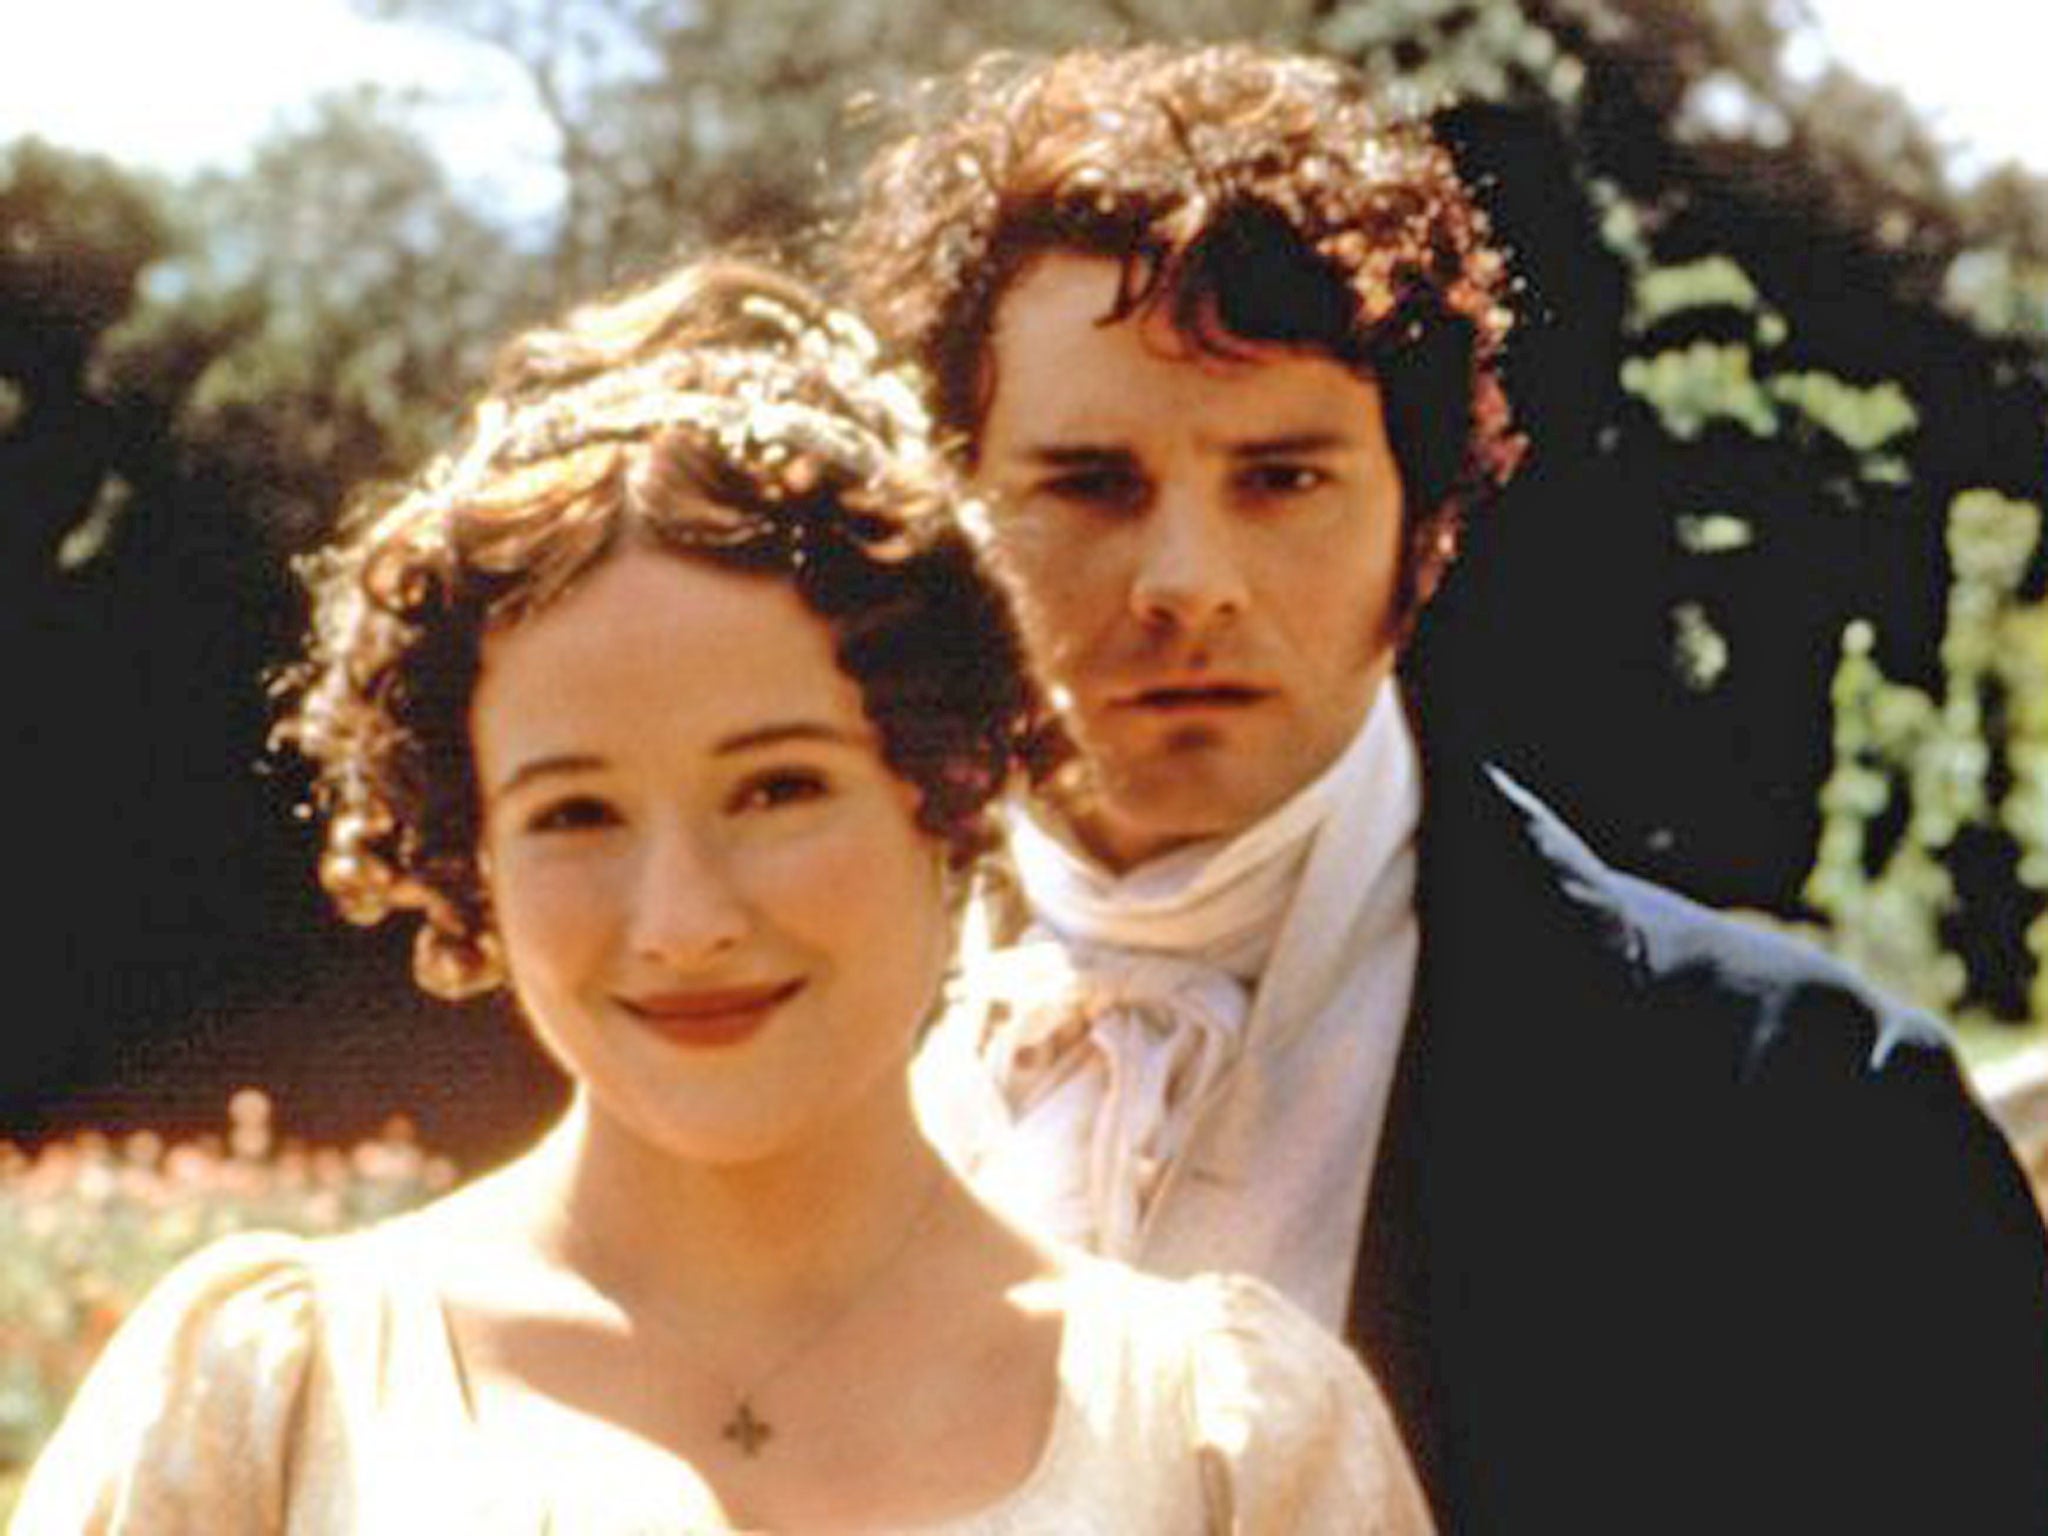 Pride and Prejudice was among the works Ben John was told to read